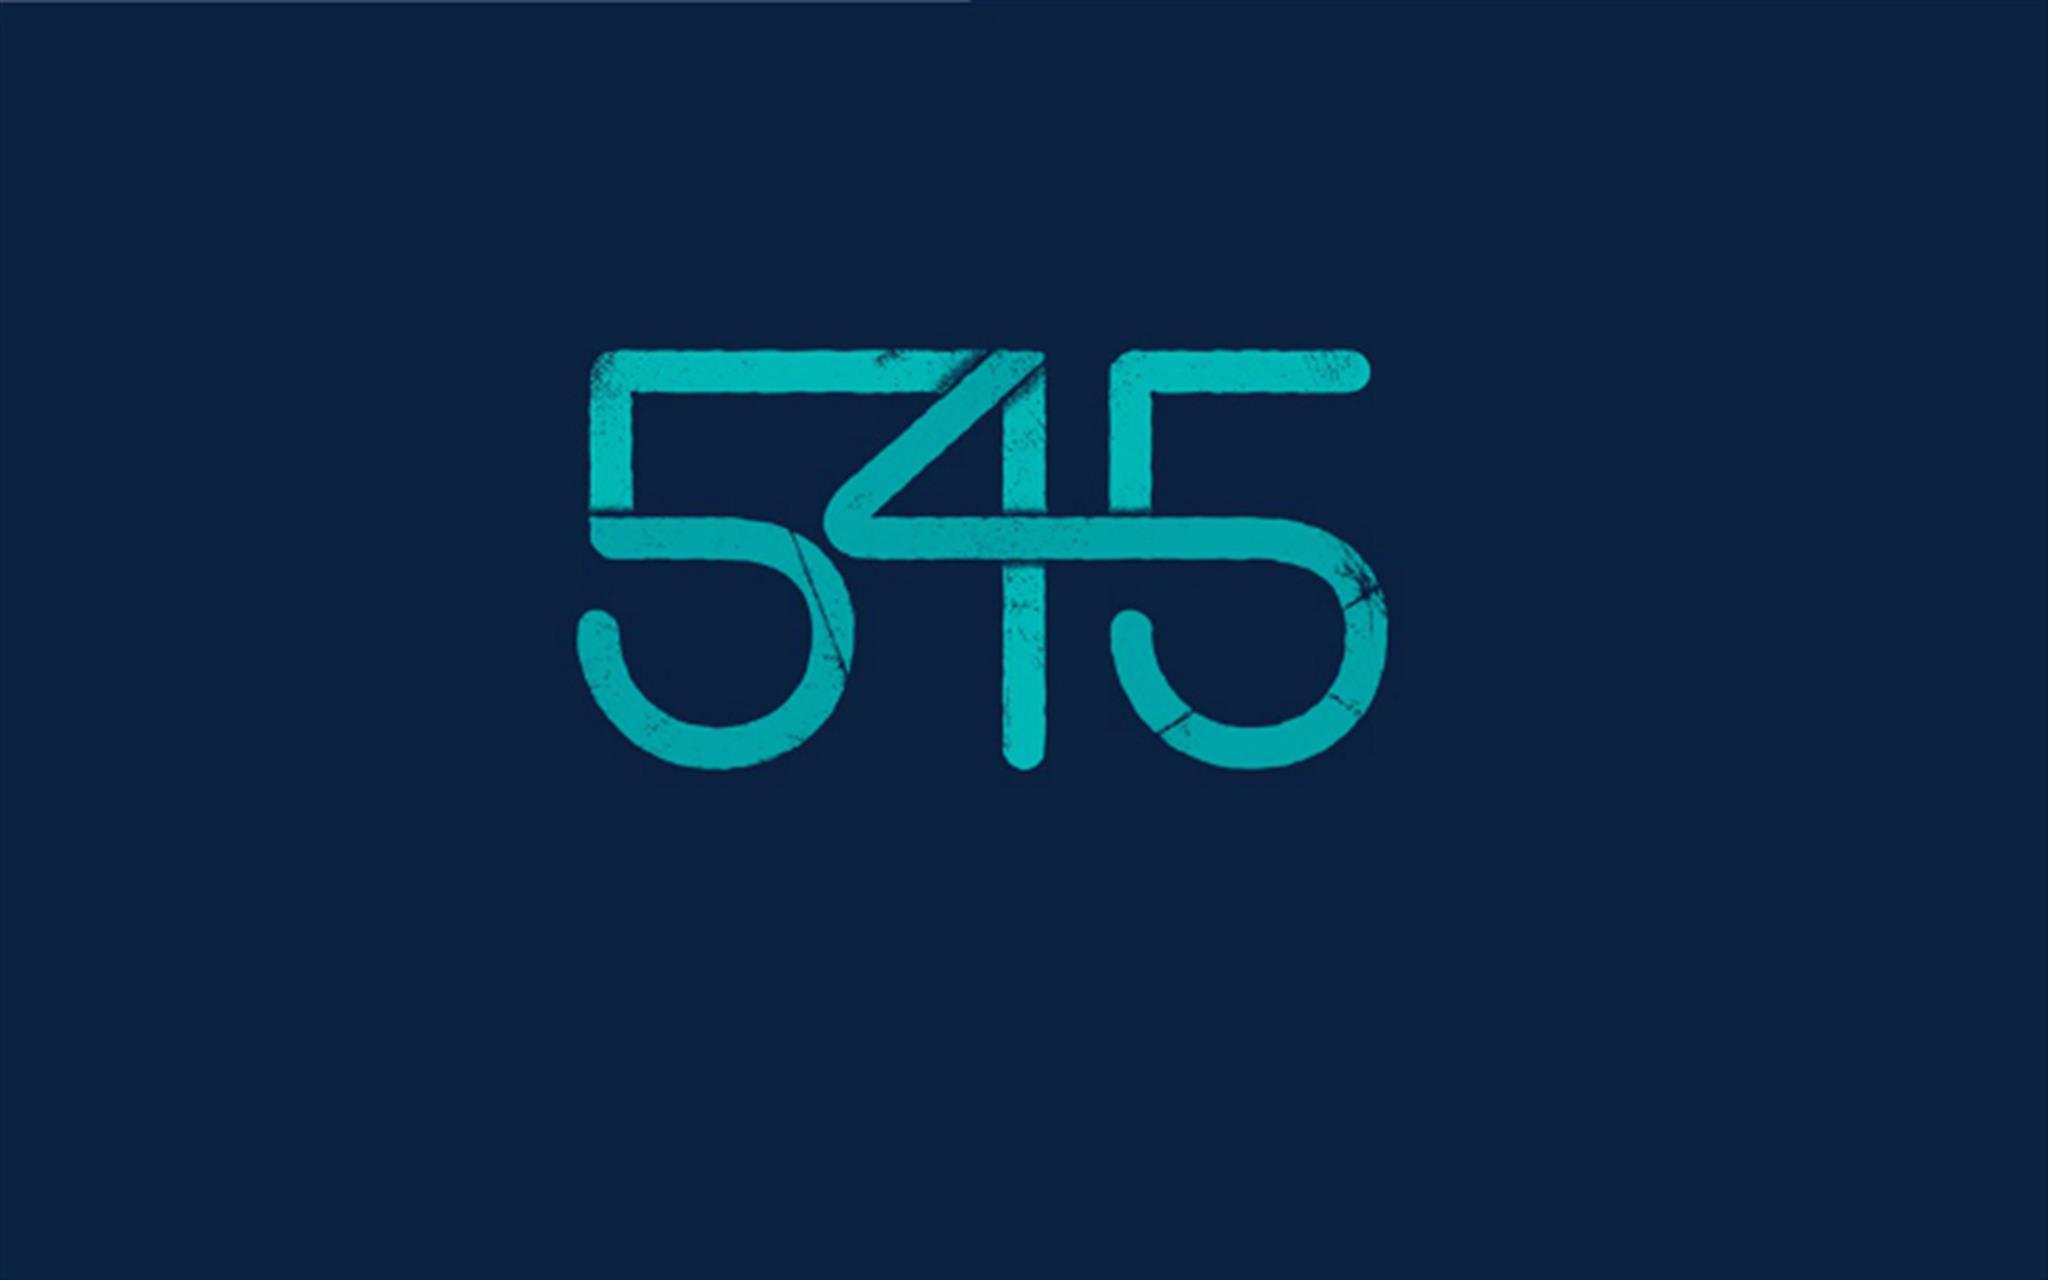 The 545 image